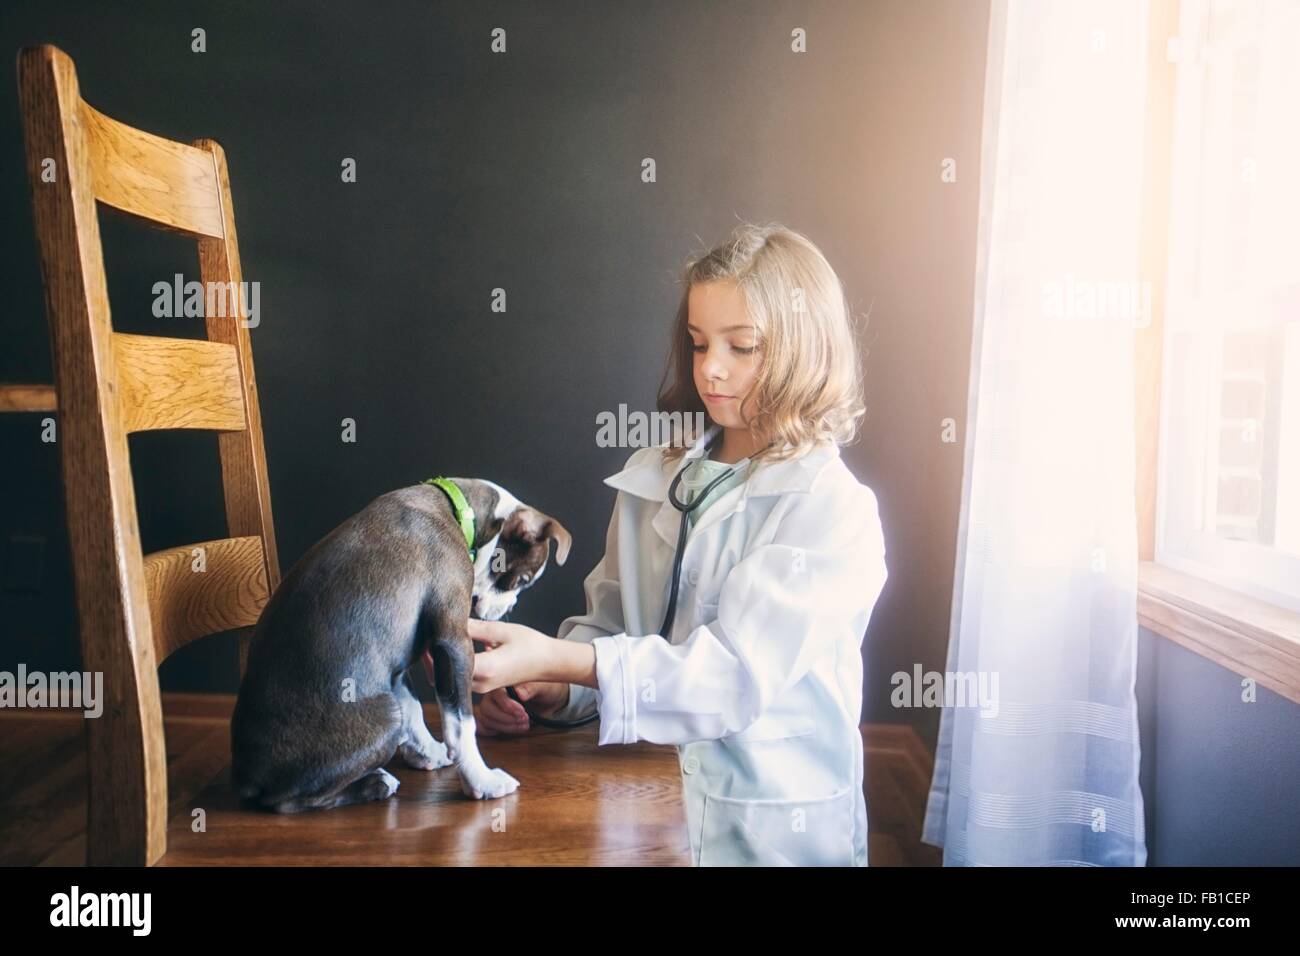 Girl dressed up as doctor kneeling tending to Boston terrier puppy sitting on chair Stock Photo